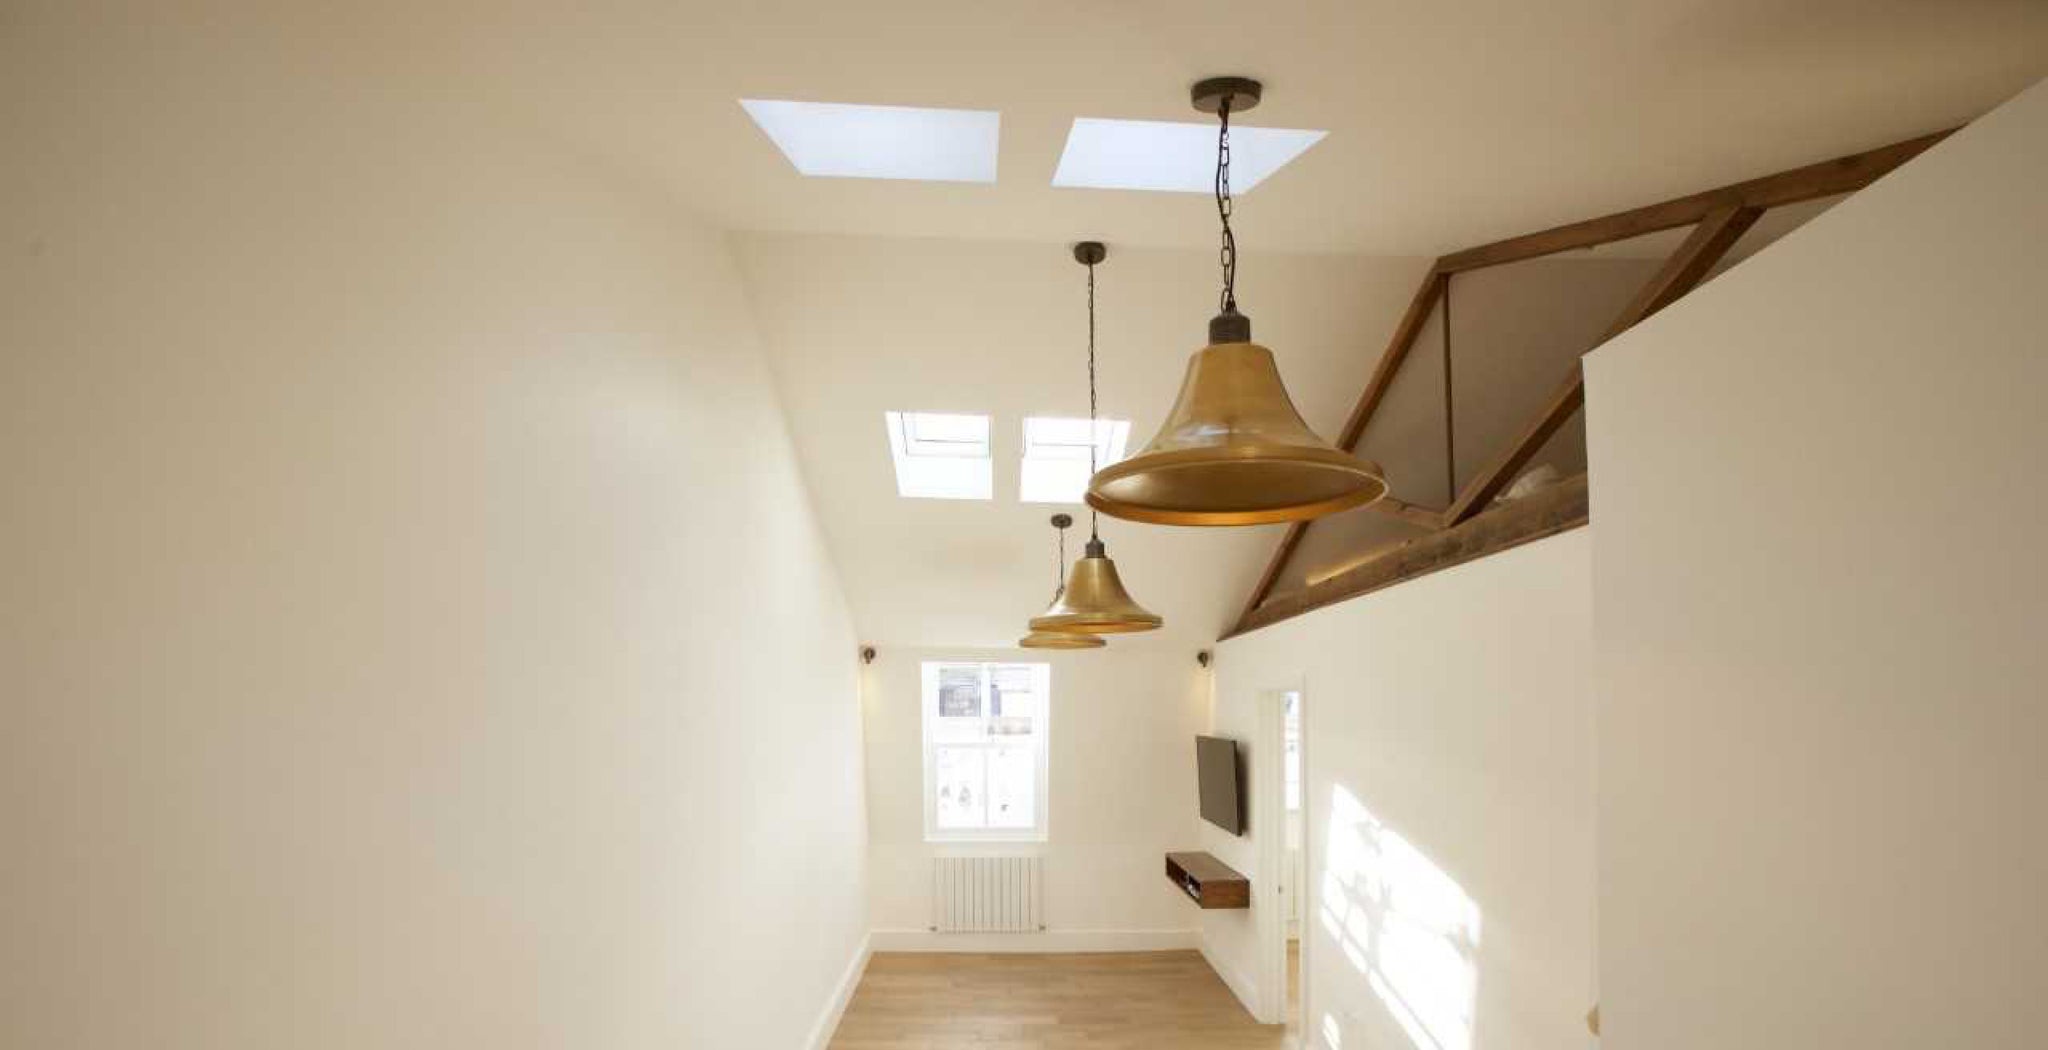 Statement ceiling with brass lights